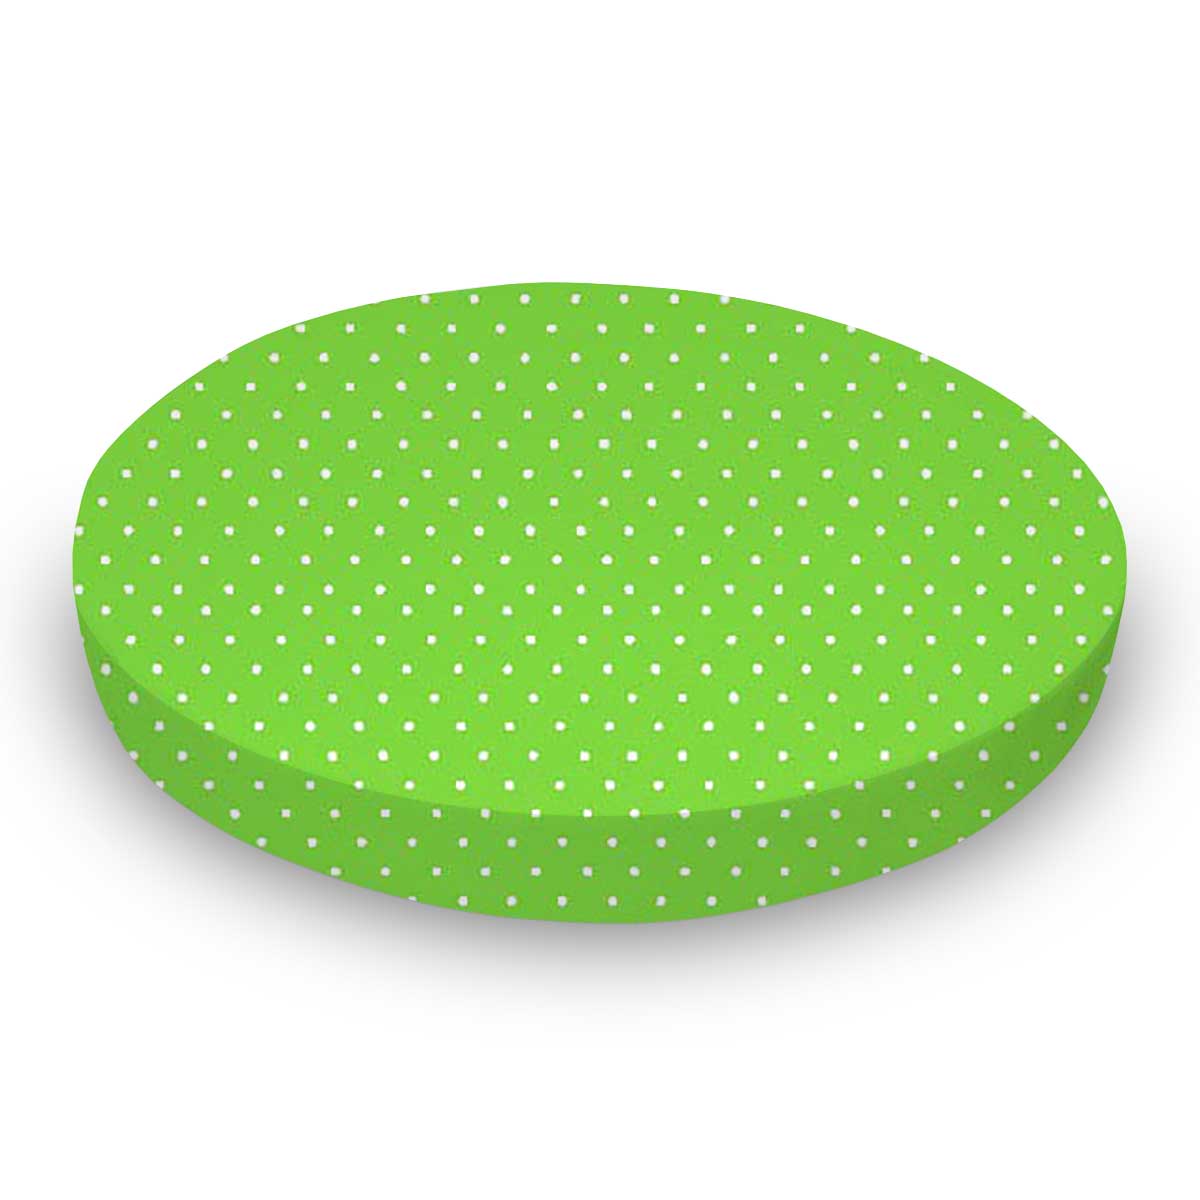 Oval Crib (Stokke Sleepi) - Primary Pindots Green Woven - Fitted  Oval